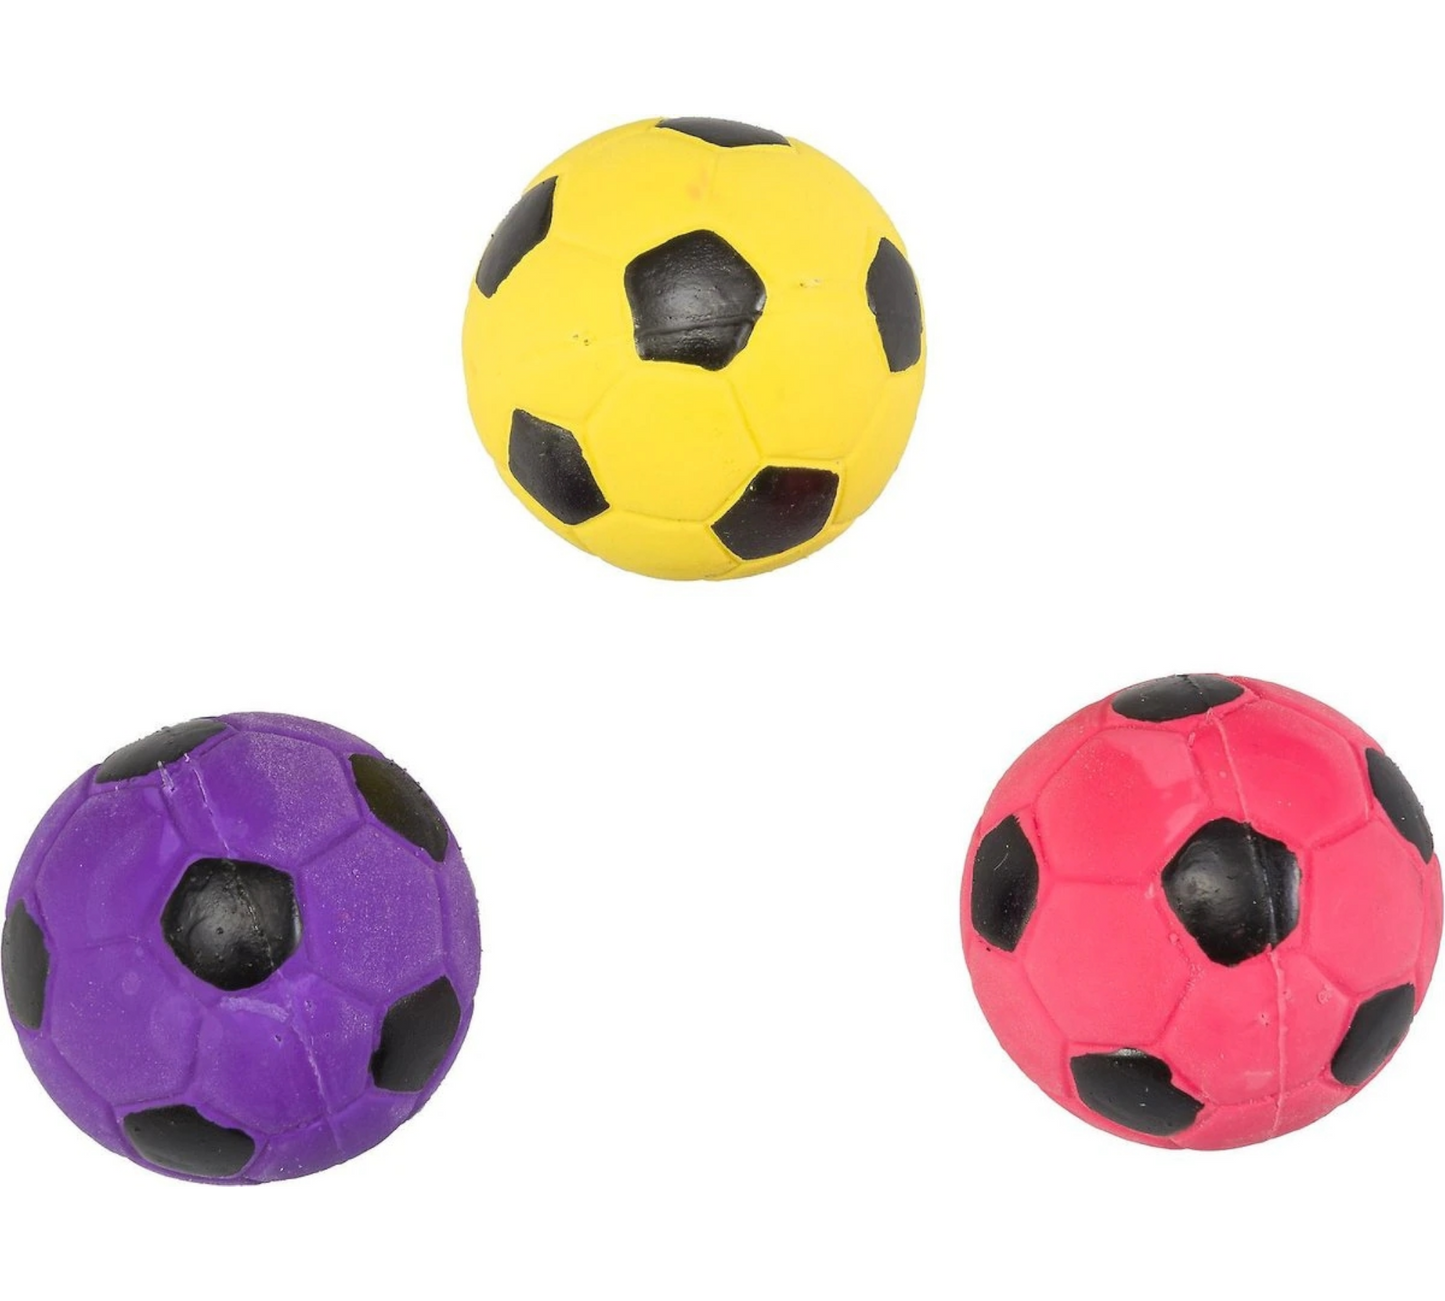 Canine's World Dog Ball Toys Spot Pet Latex Soccer Ball Squeaky Dog Chew Toy, Color Varies, 2-in Spot